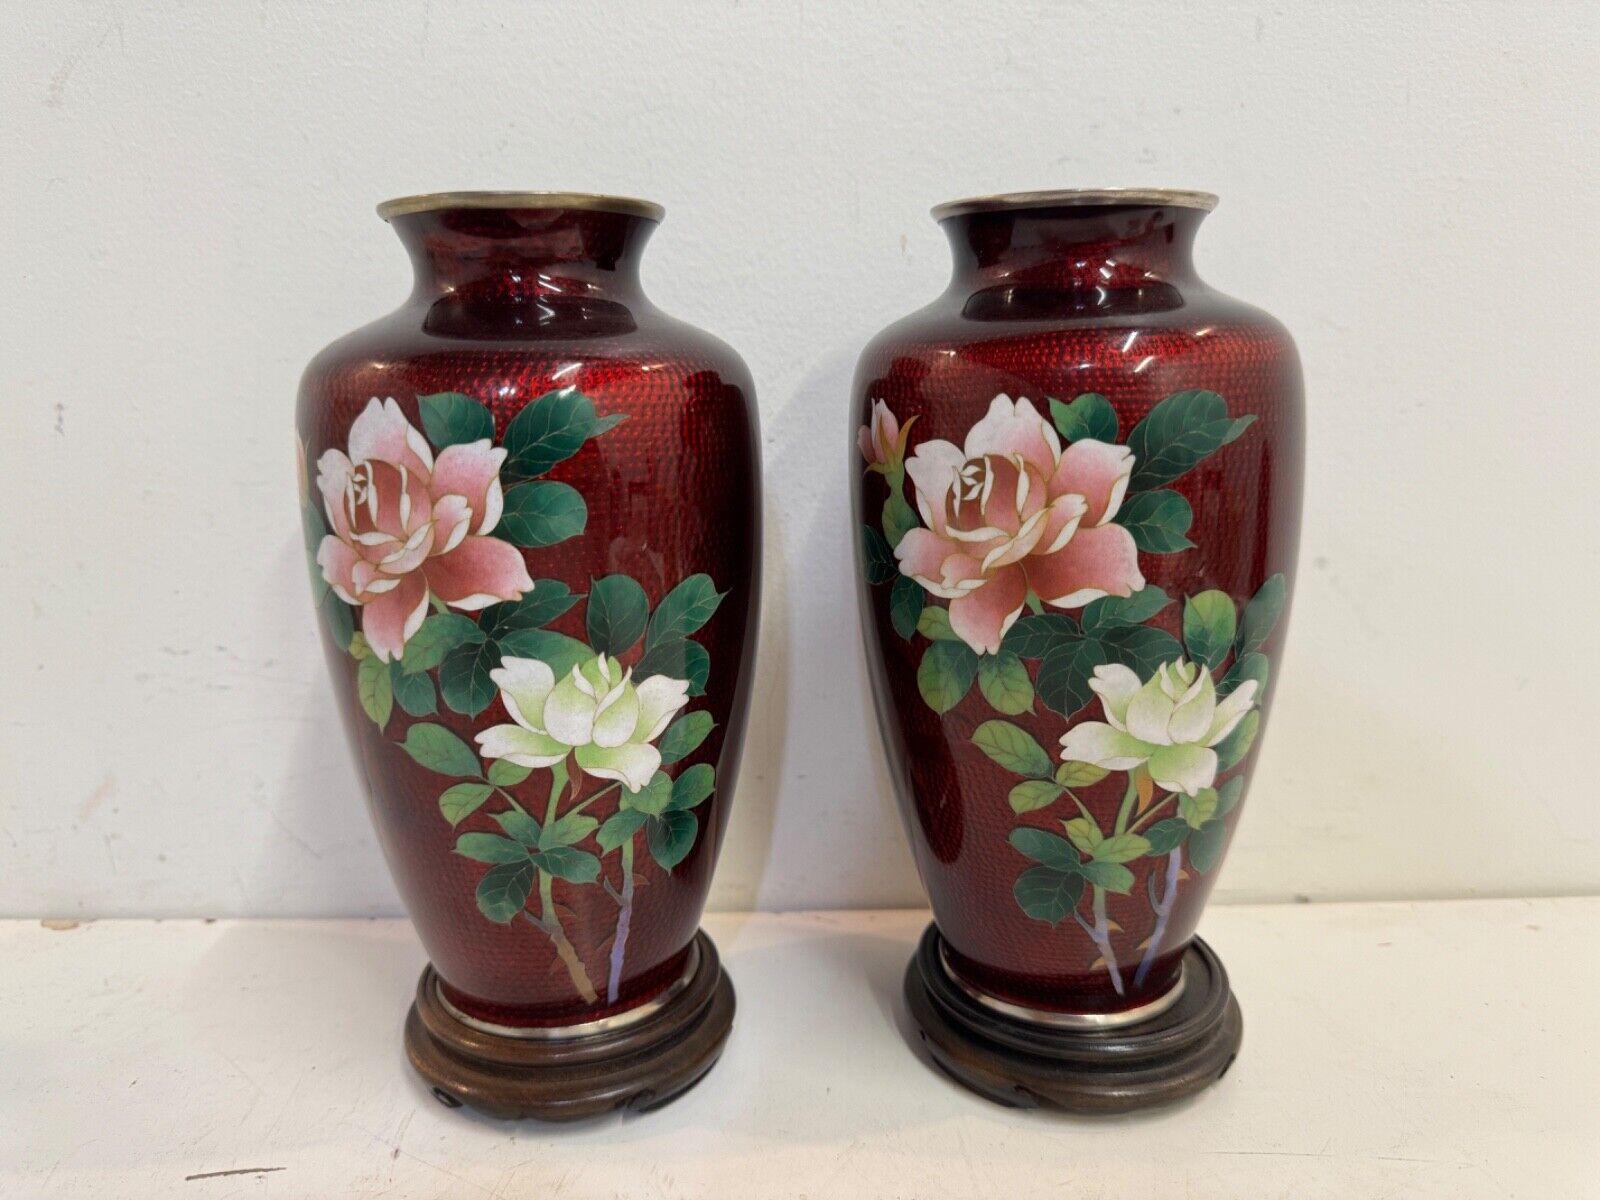 Vintage Japanese Silver Mounted Red Cloisonne Pair of Vases w/ Flower Decoration